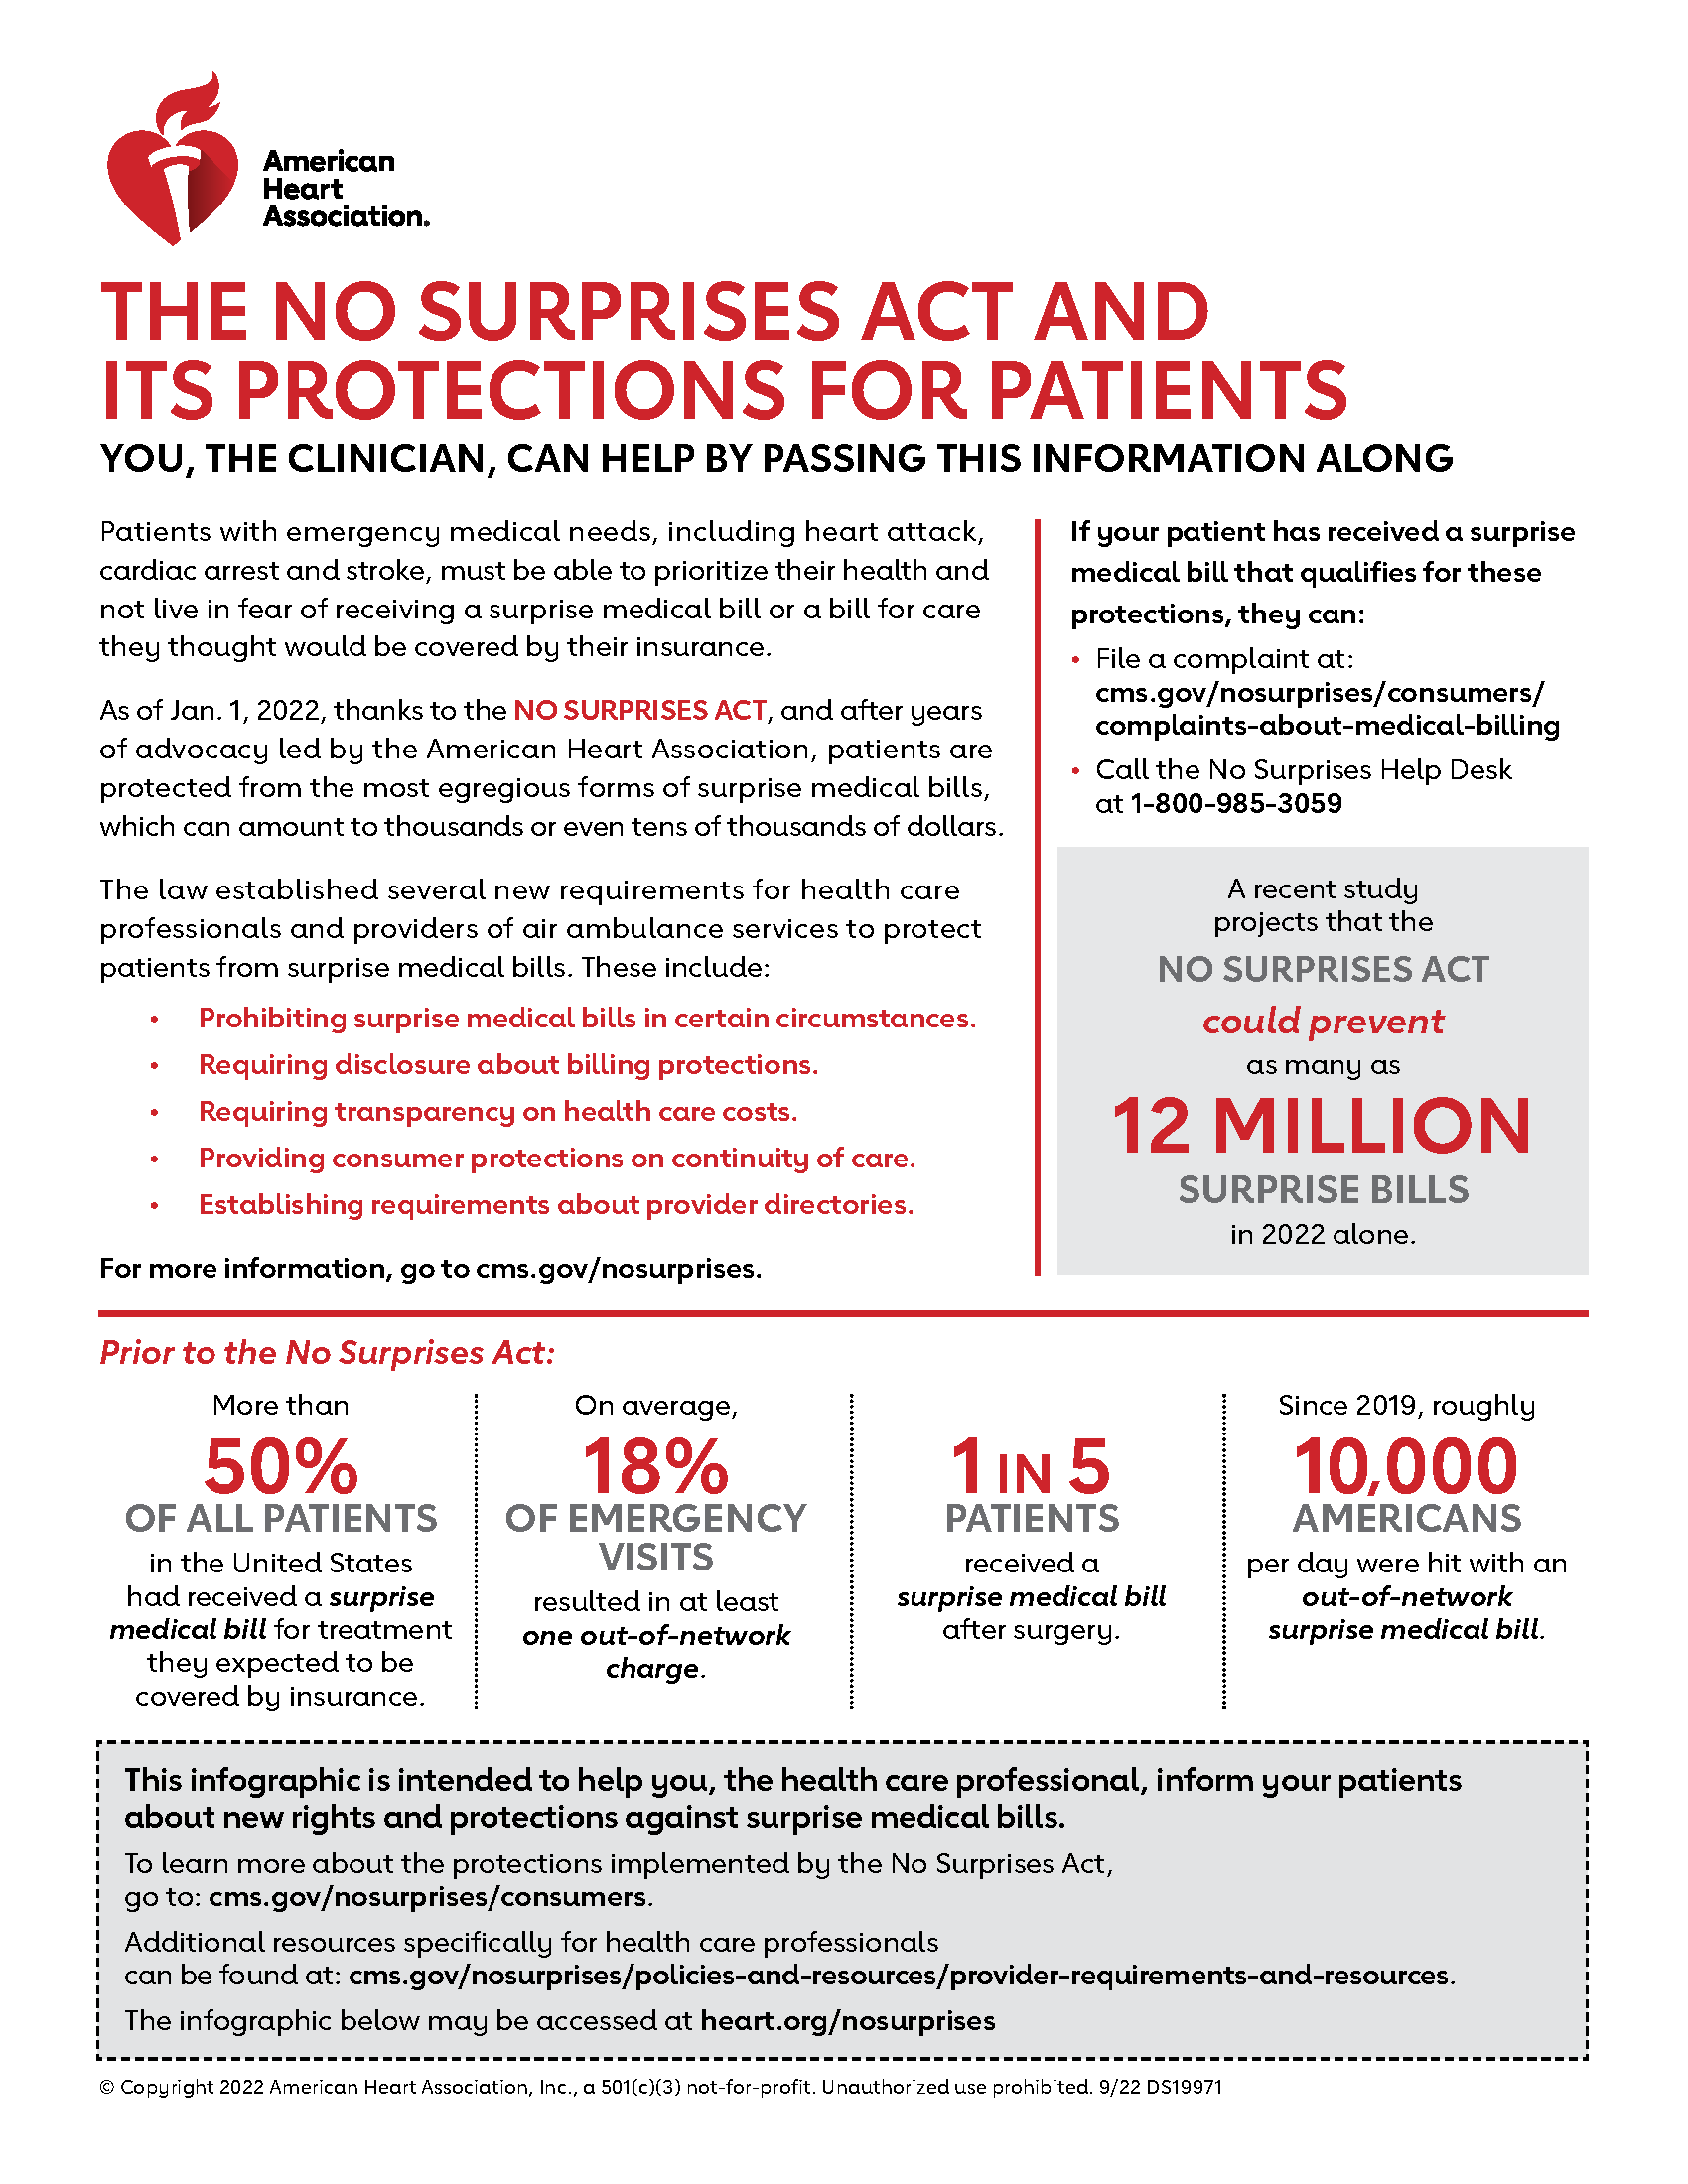 The No Surprises Act and its Protection for Patients